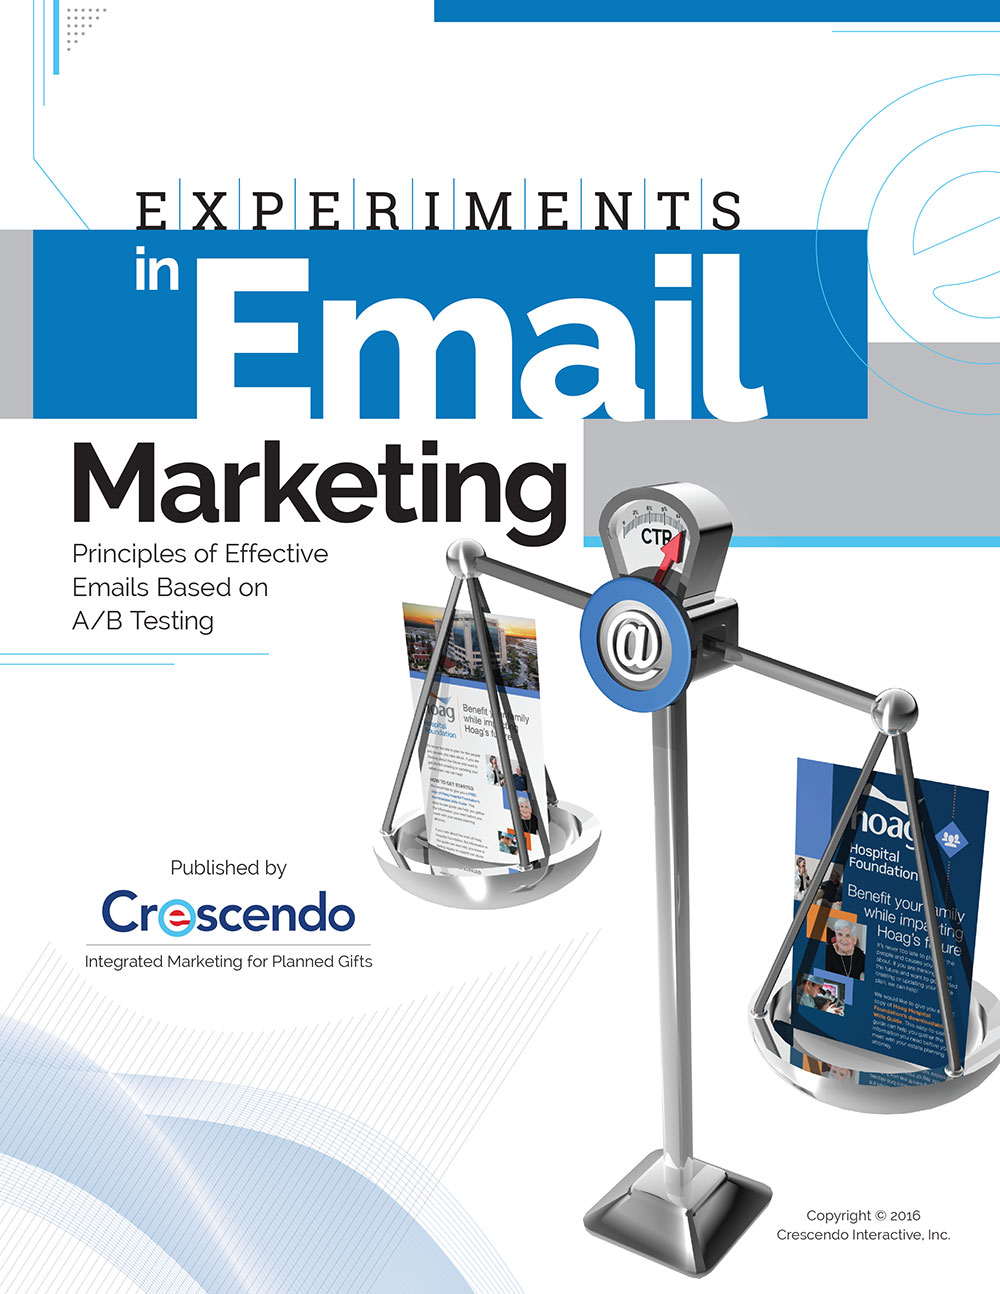 Experiments in Email Marketing: Principles of Effective Emails Based on A/B Testing